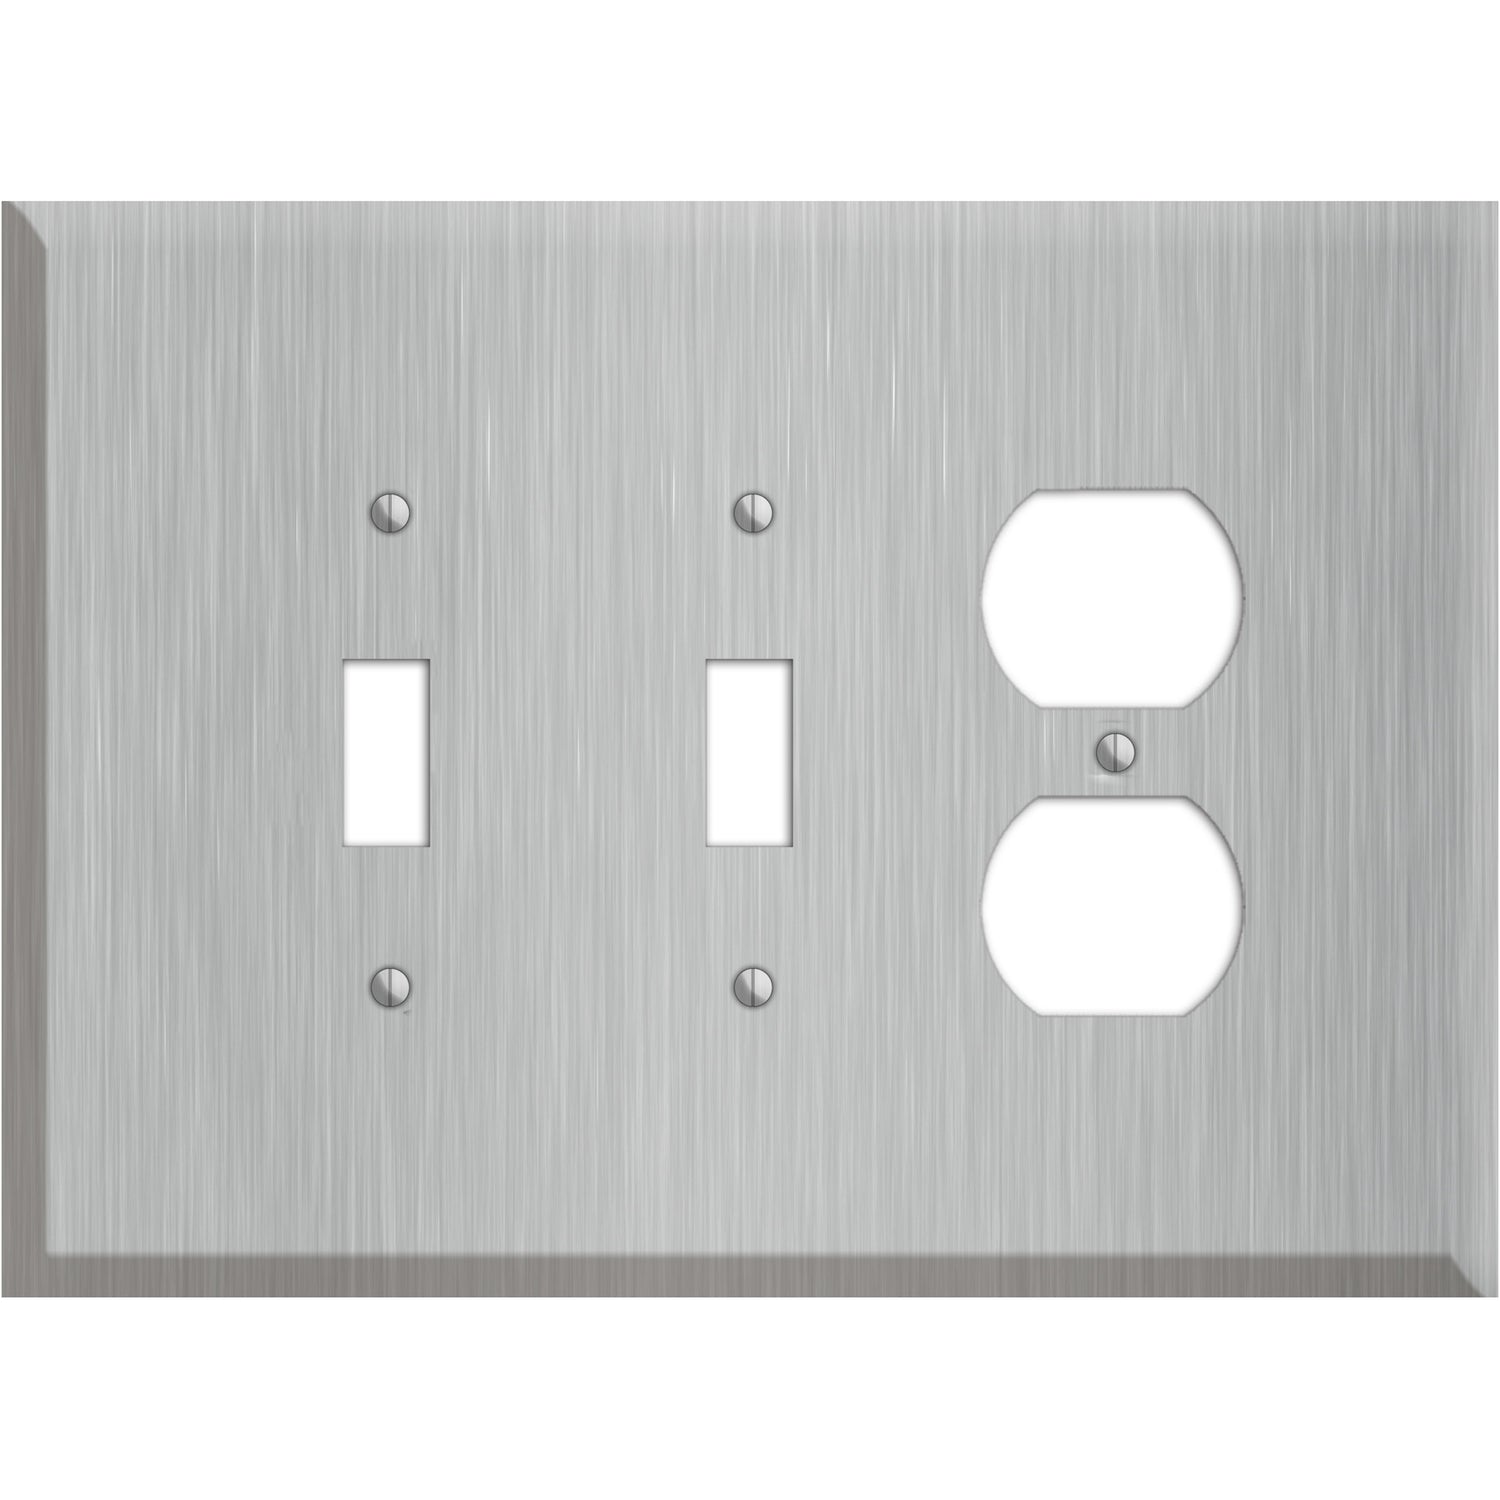 Oversized Discontinued Stainless Steel 2 Toggle / Duplex Wallplate